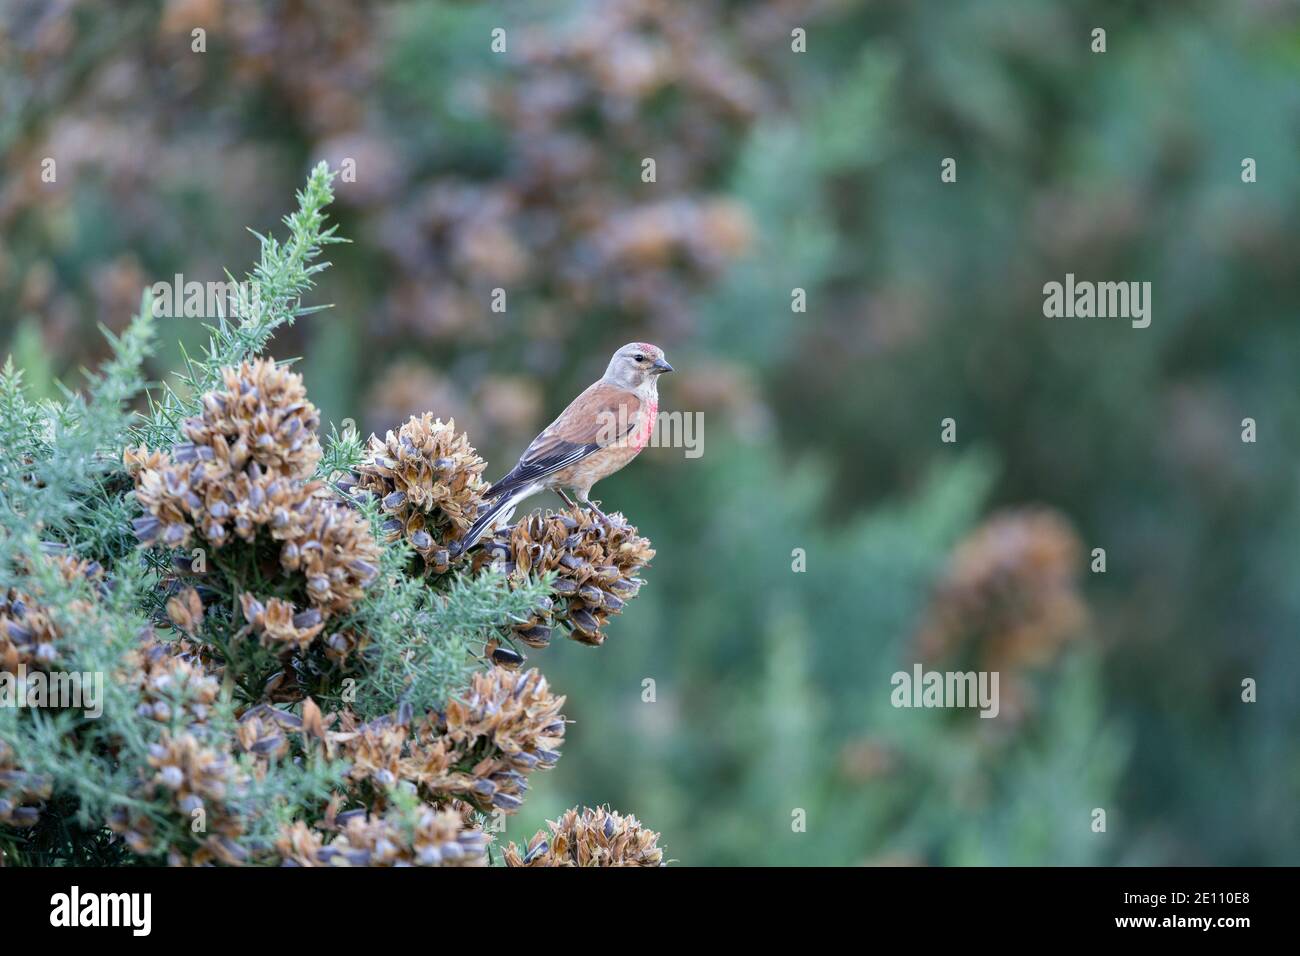 Common linnet Carduelis cannabina, adult male perched on gorse, Crabtree Hill, Forest of Dean, Gloucestershire, UK, July Stock Photo